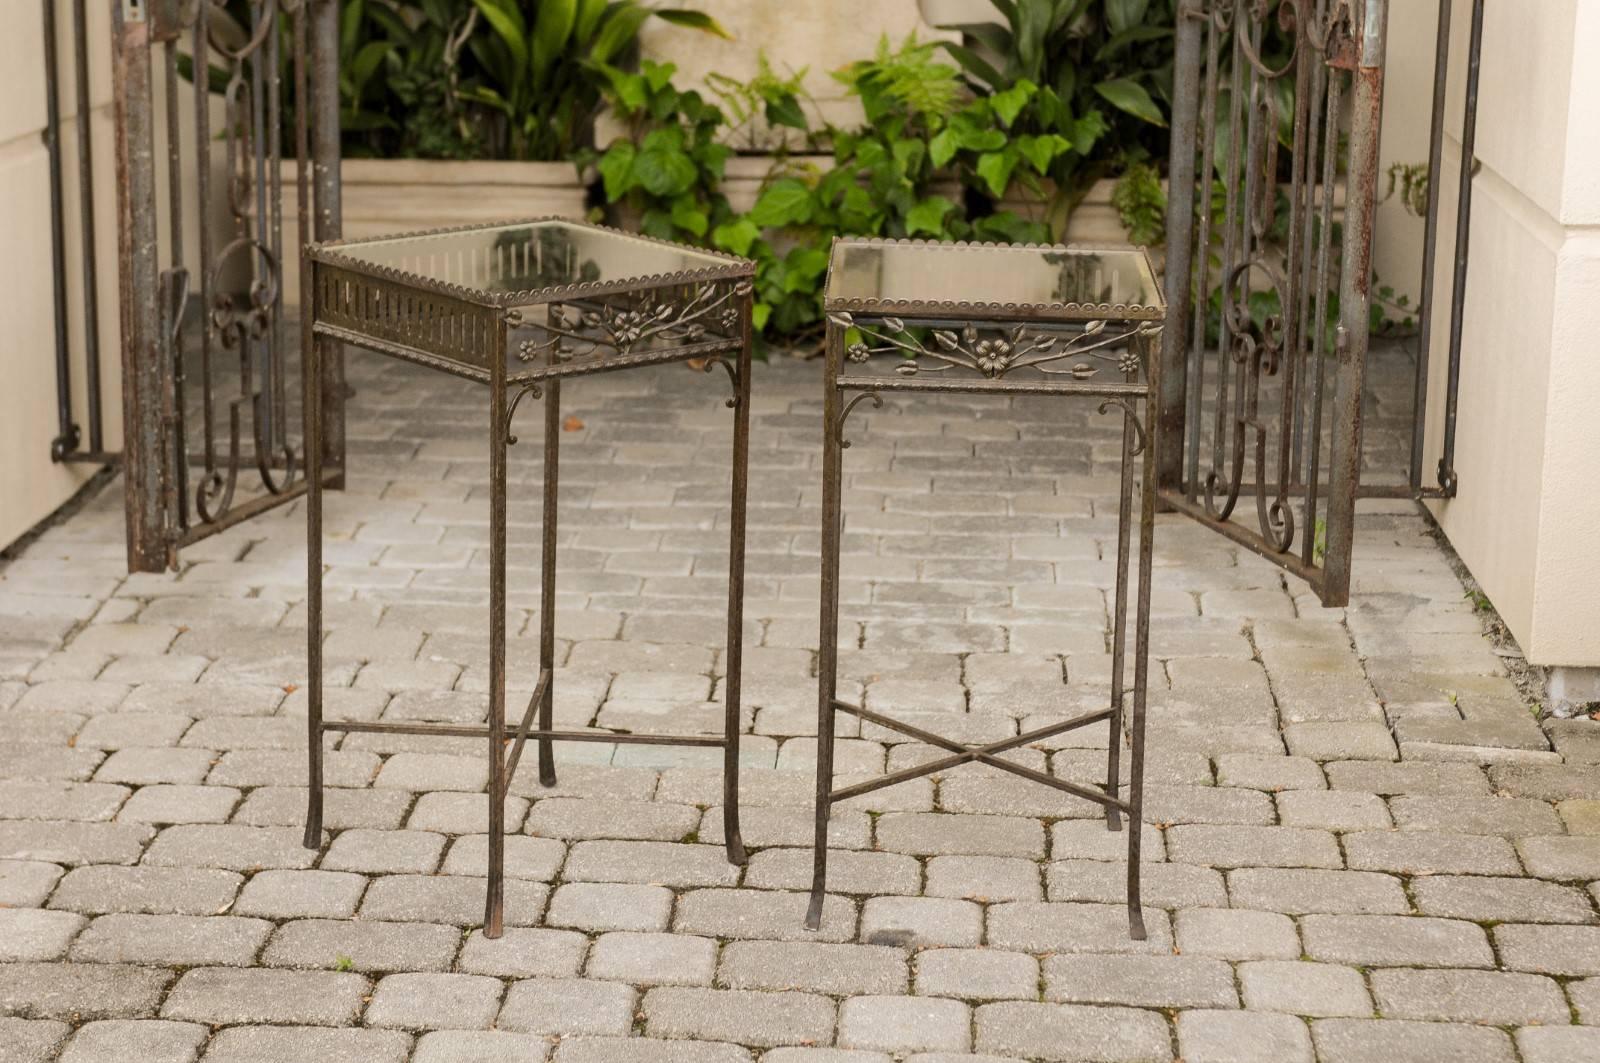 A pair of French hand-wrought iron side tables from the early 20th century, with floral motifs, new glass tops and cross stretchers. This pair of French side tables was born in the turn of the century (19th to 20th) during the Belle Époque era. Each